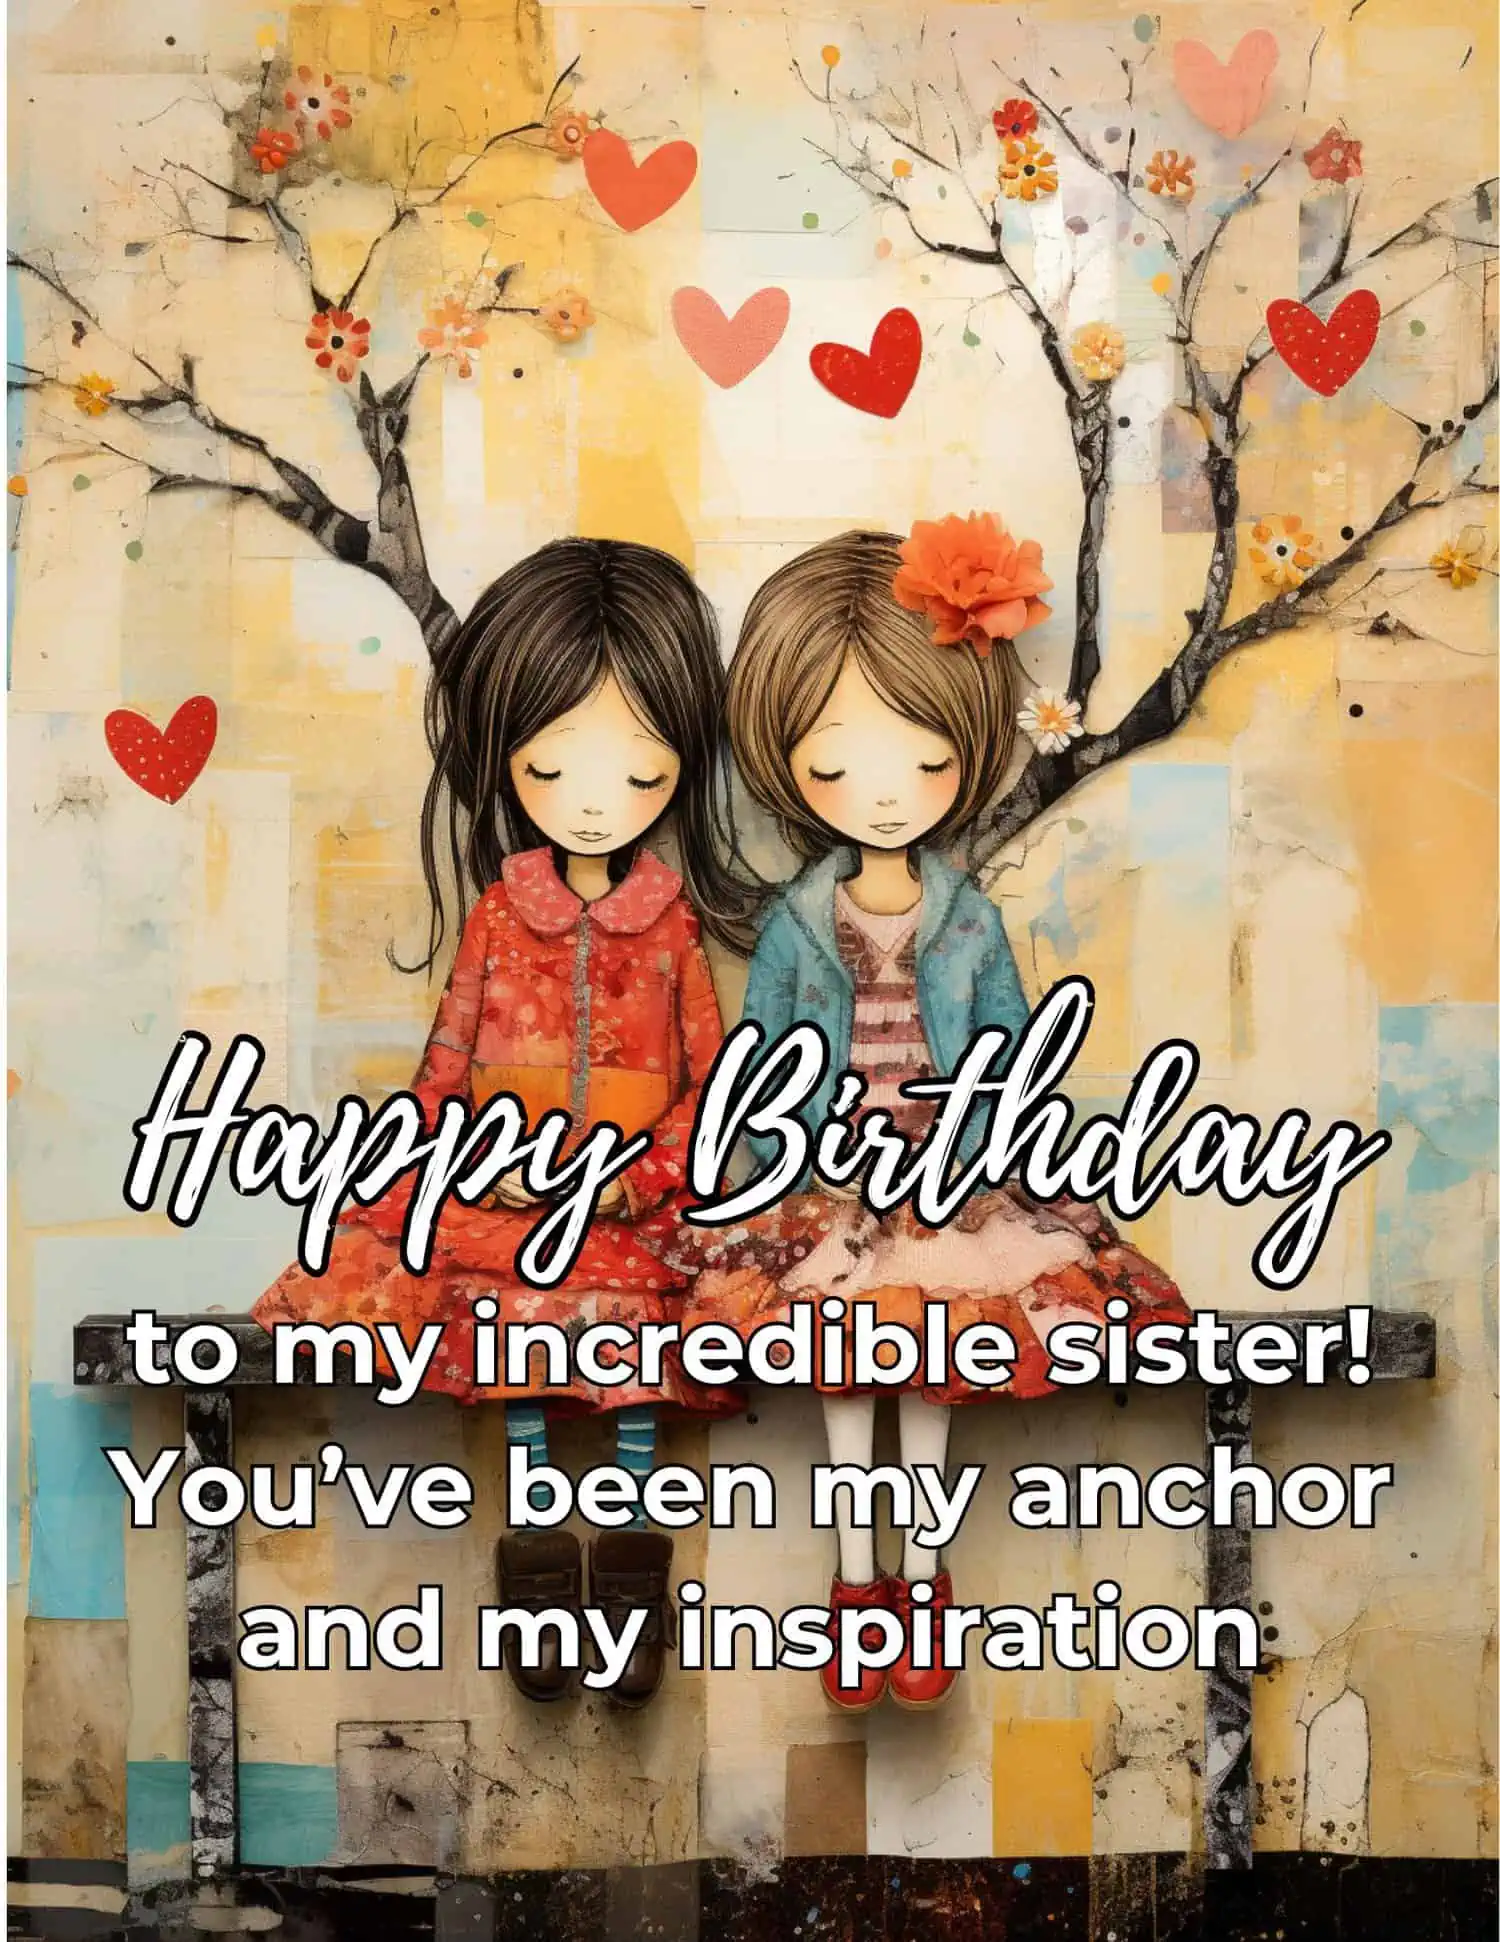 A compilation of deep and meaningful birthday wishes for one's beloved sister.